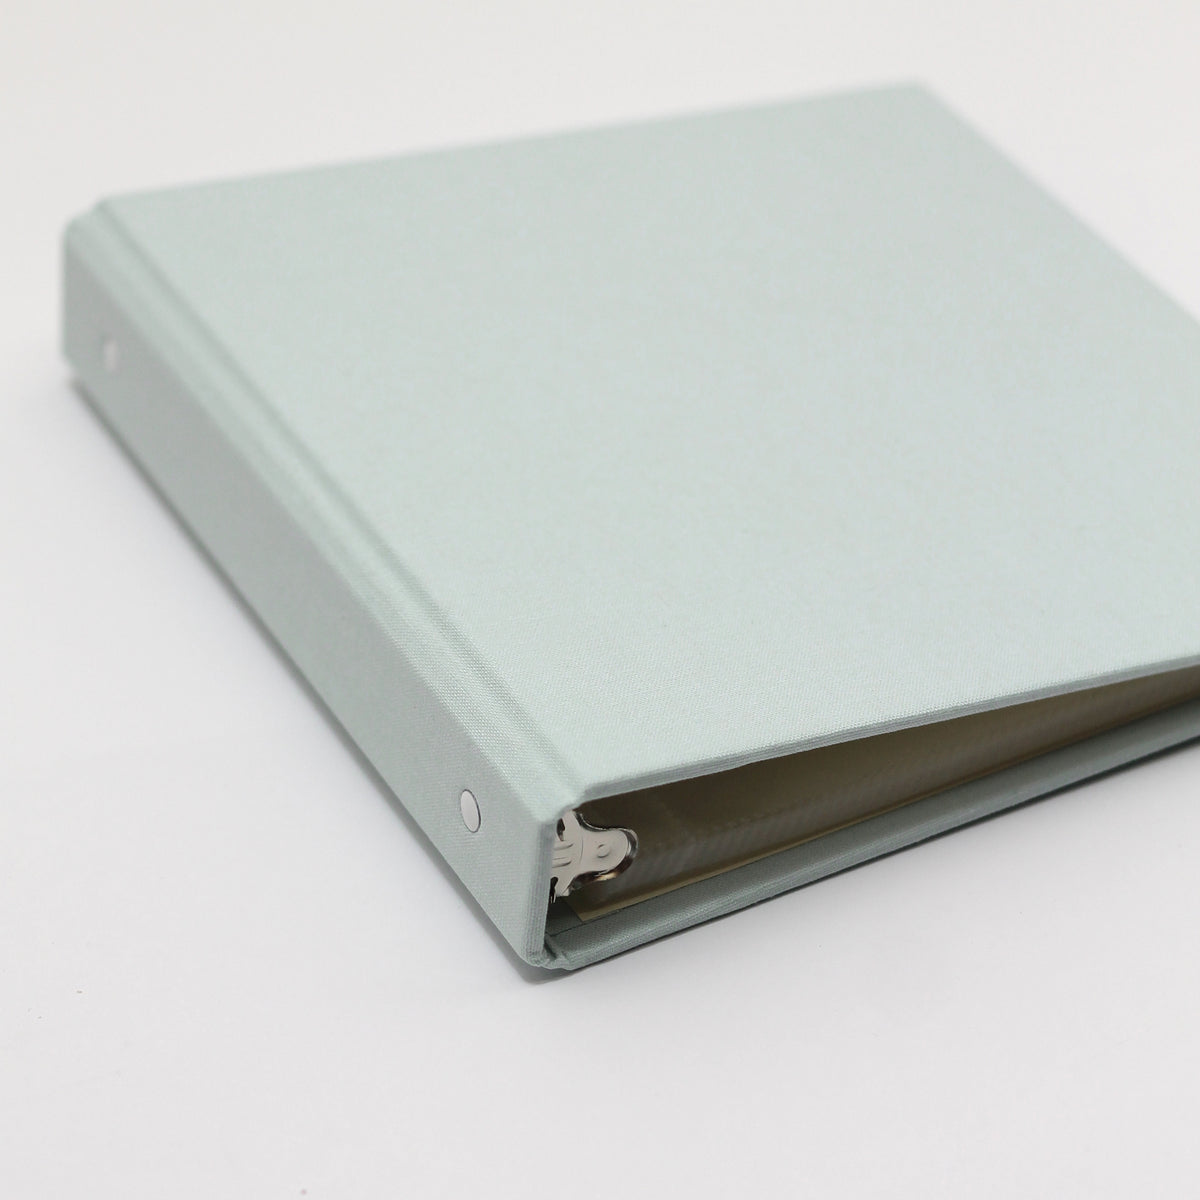 Medium Photo Binder For 4x6 Photos | Cover: Powder Blue Cotton | Available Personalized